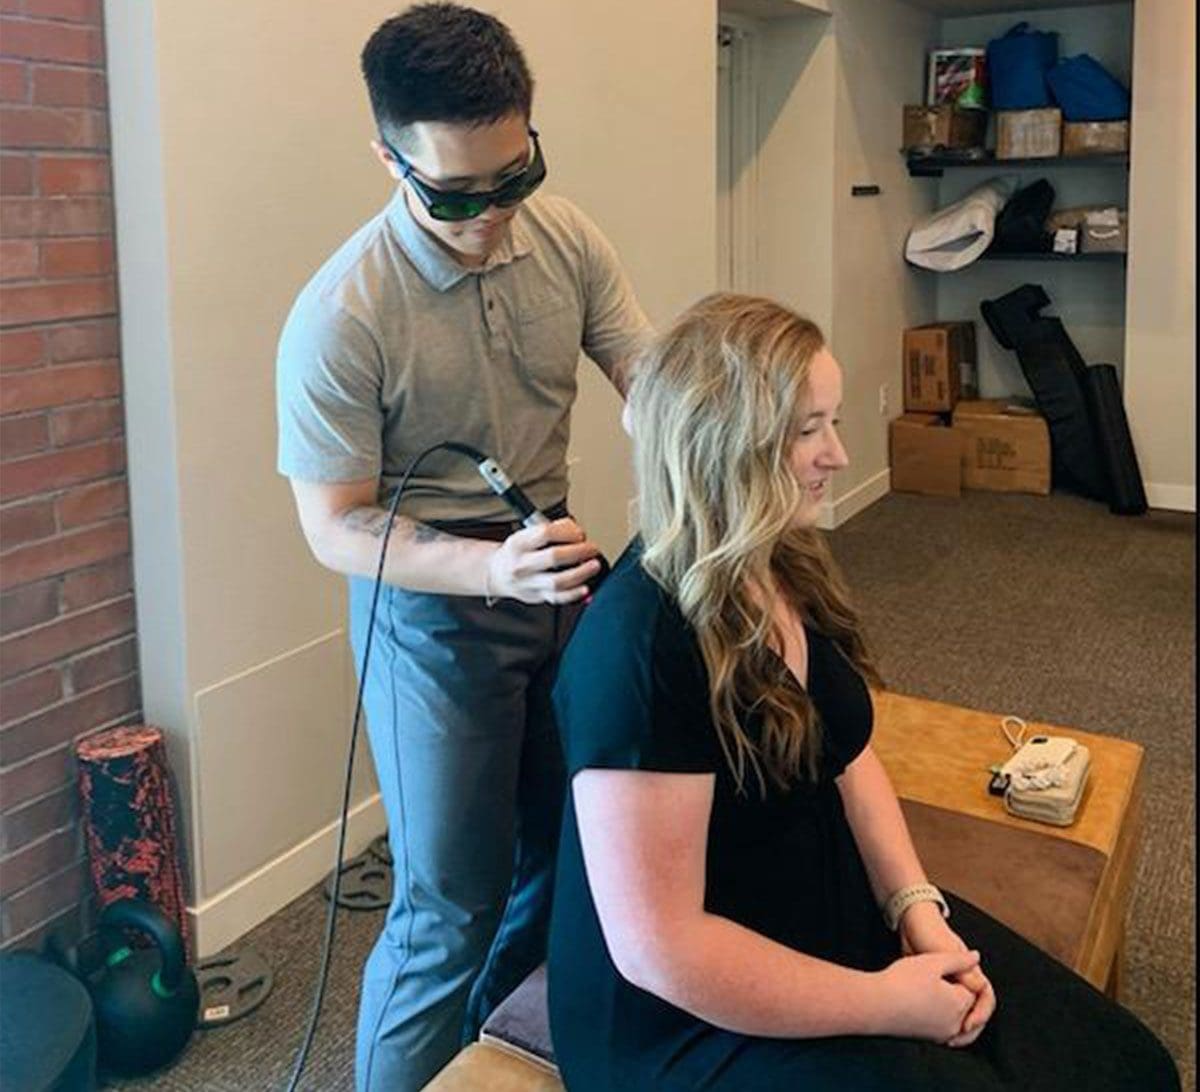 A Chiropractor administering laser therapy on a female patients back.